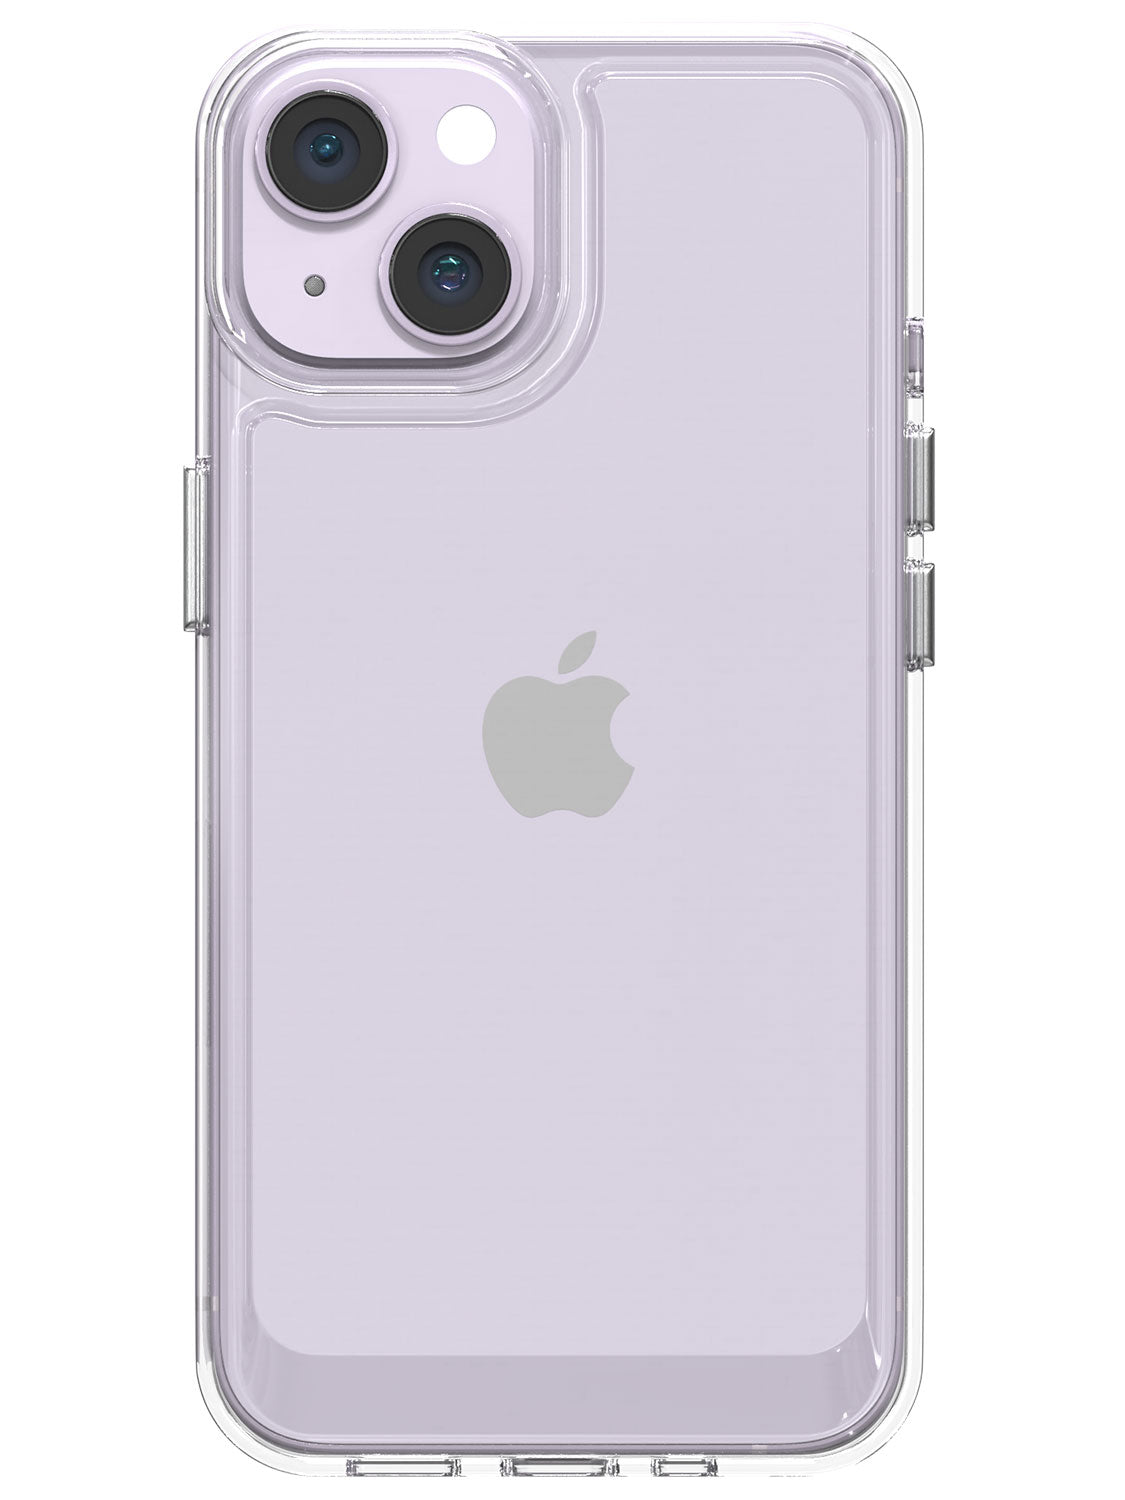 case for iPhone 14 , back cover for iPhone 14 , cases and covers for iPhone 14 , clear case for iPhone 14 , clear cover for iPhone 14 , clear back cover for iPhone 14 , transparent case for iPhone 14